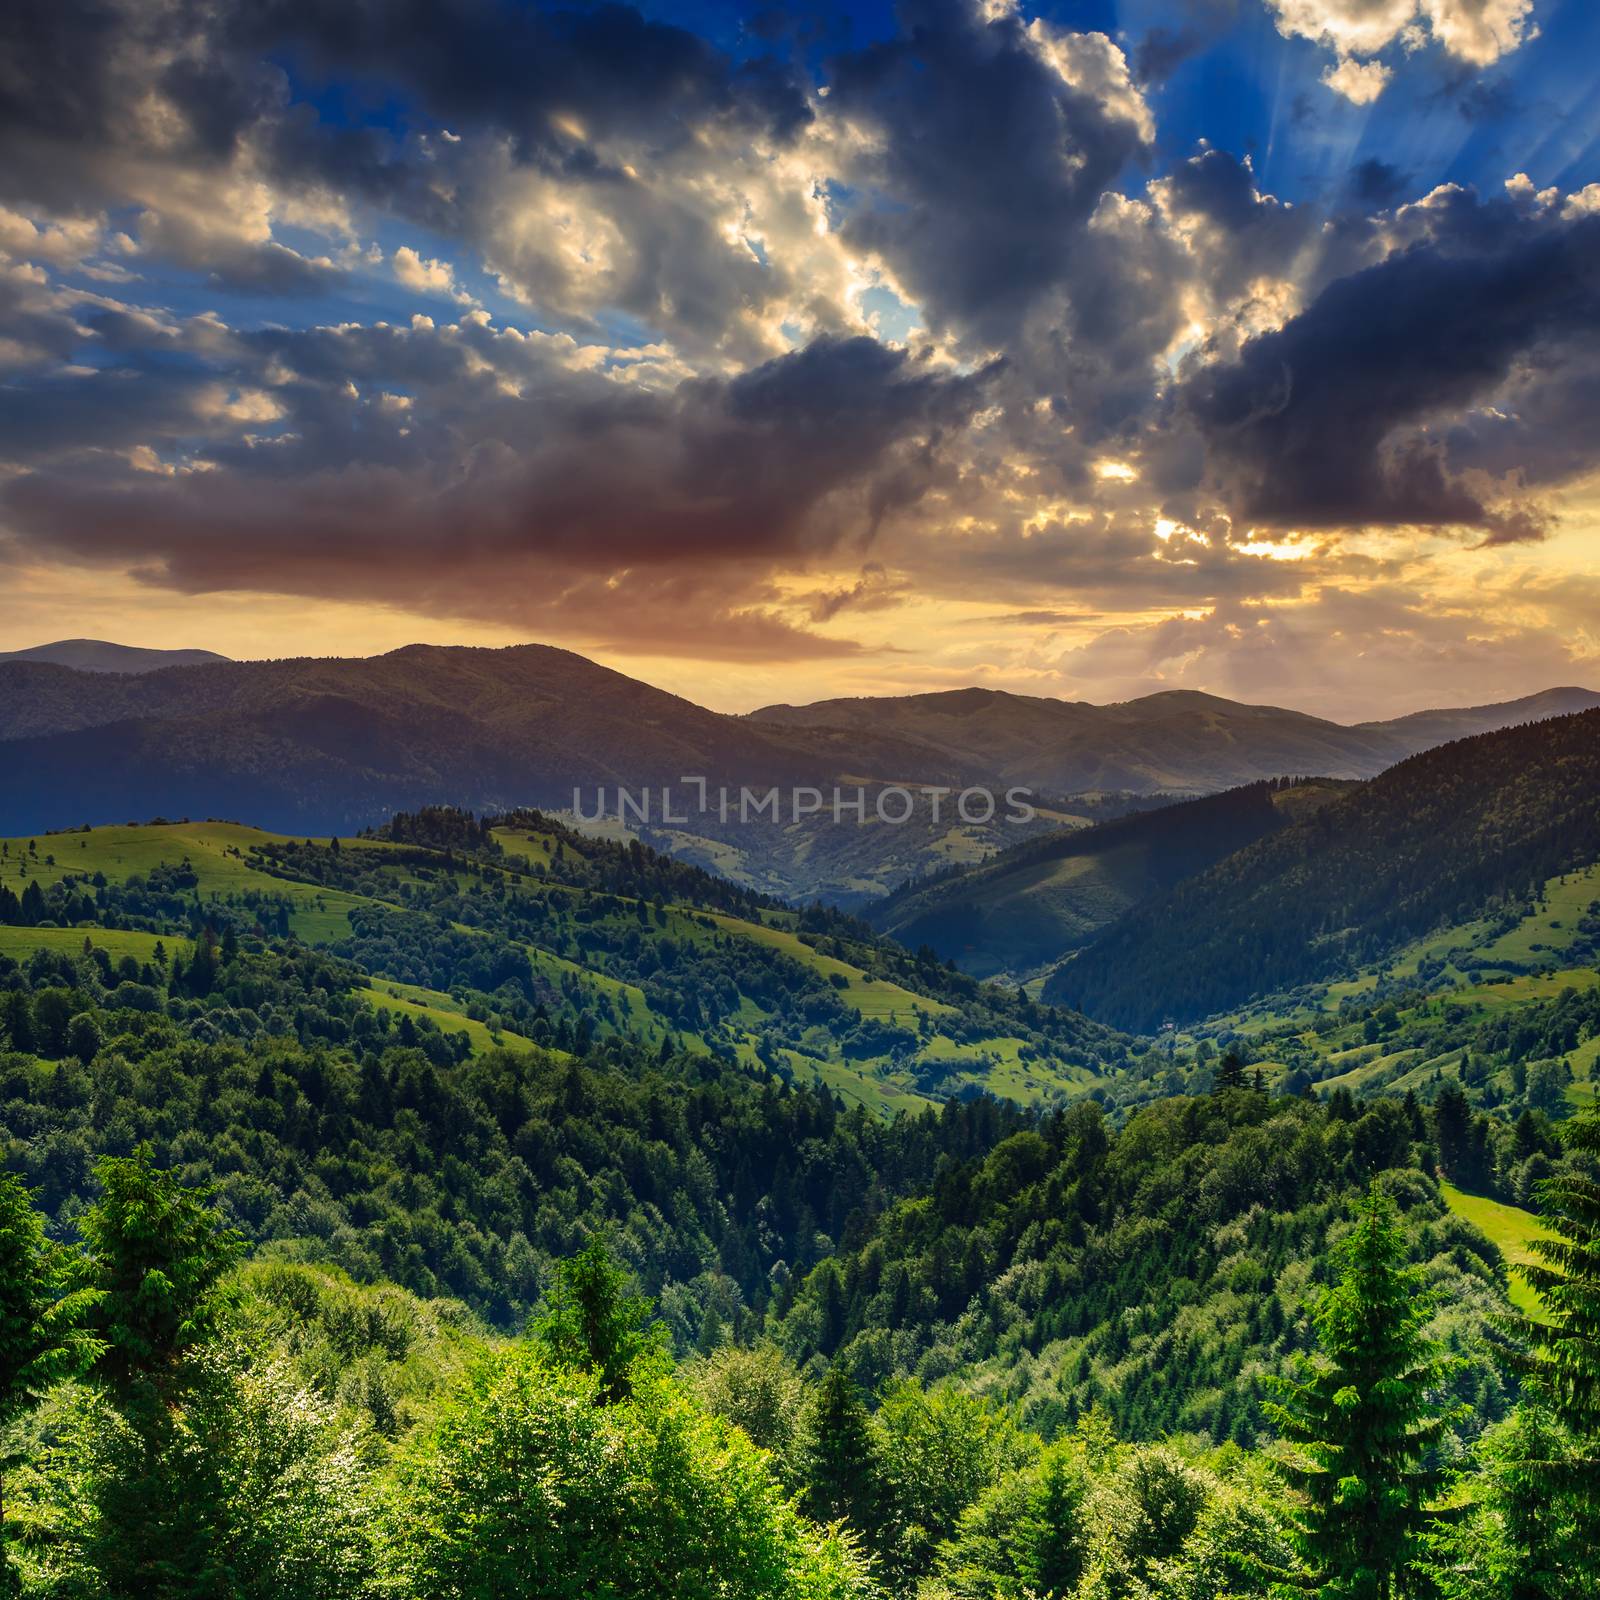 coniferous forest on a steep mountain range slope